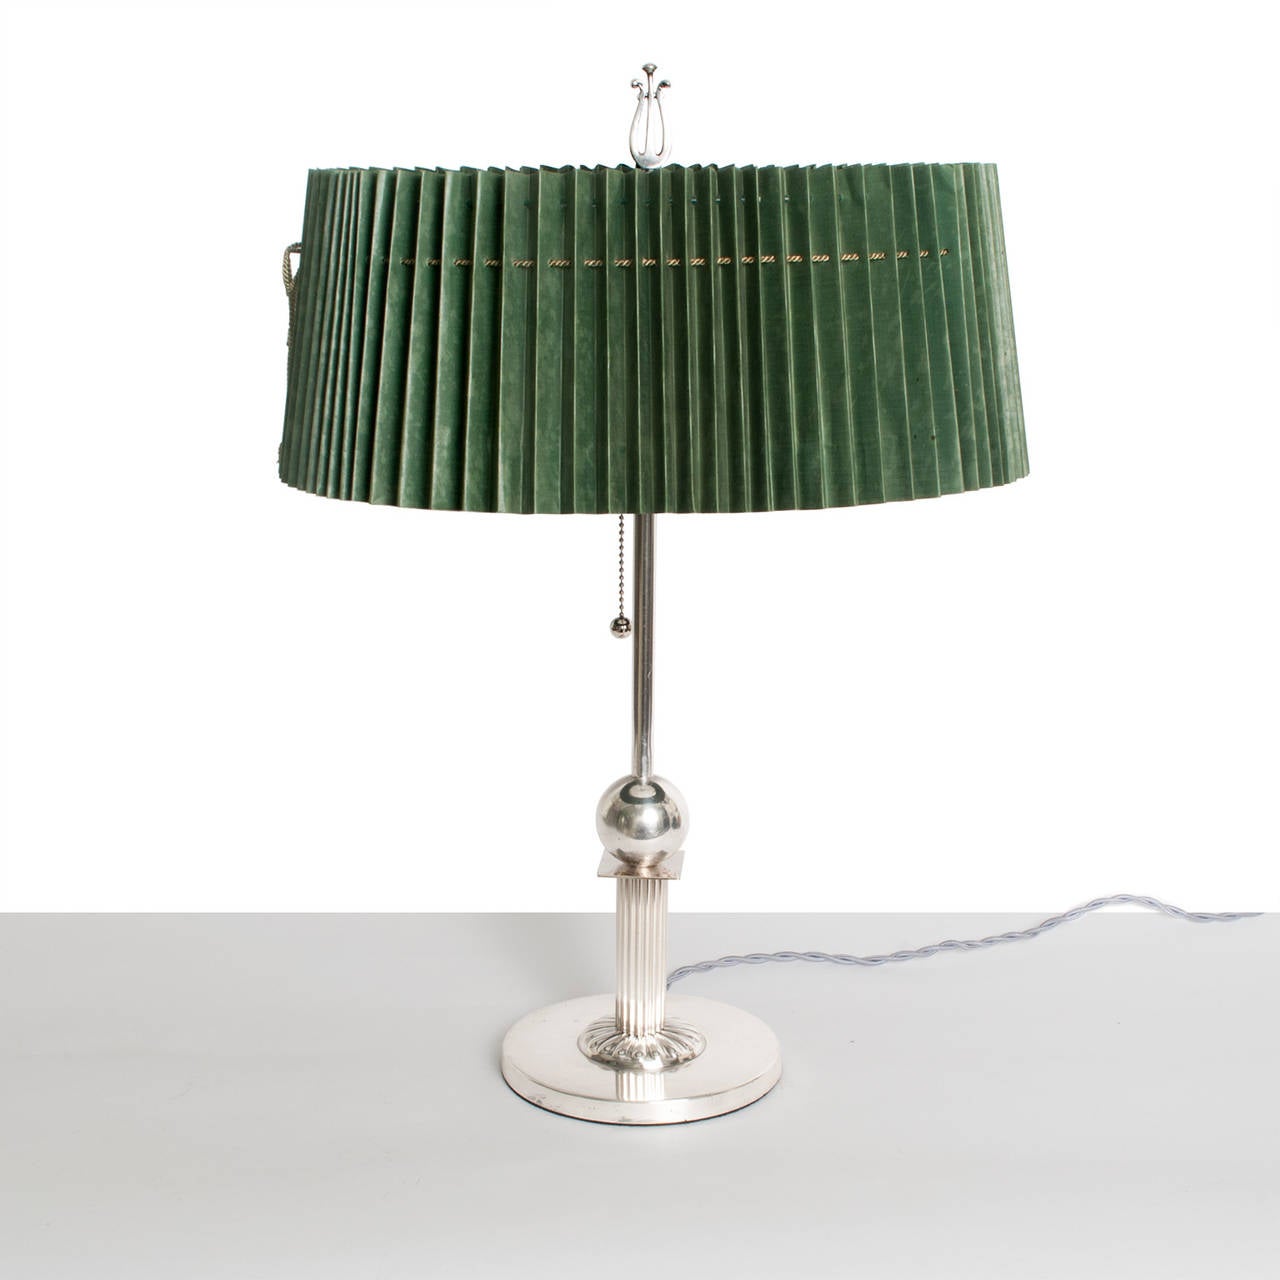 A refined Swedish art deco silver and silver plated table lamp with original oval shaped pleated paper shade. The lamp features a fluted column which supports a solid silver rectangle and hollow sphere. The base is simple disk with a rosette